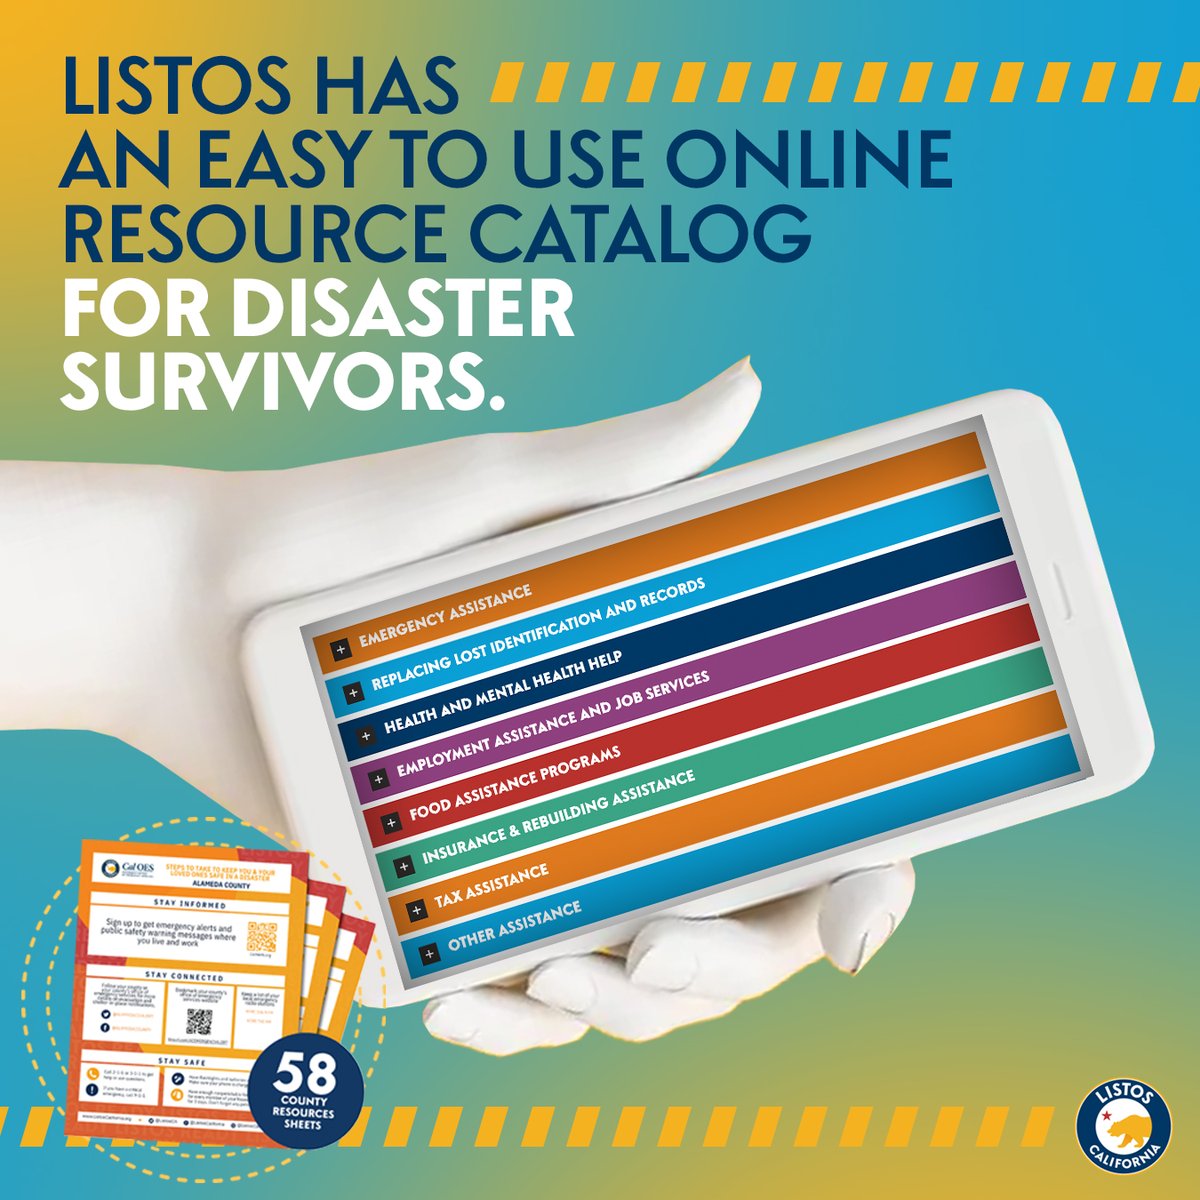 The resources in the Disaster Recovery Resources guide can help you find the help you need to recover after surviving a disaster. Visit listoscalifornia.org/recovery to find the full guide, emergency assistance, free resources, and more. #ListosCalifornia